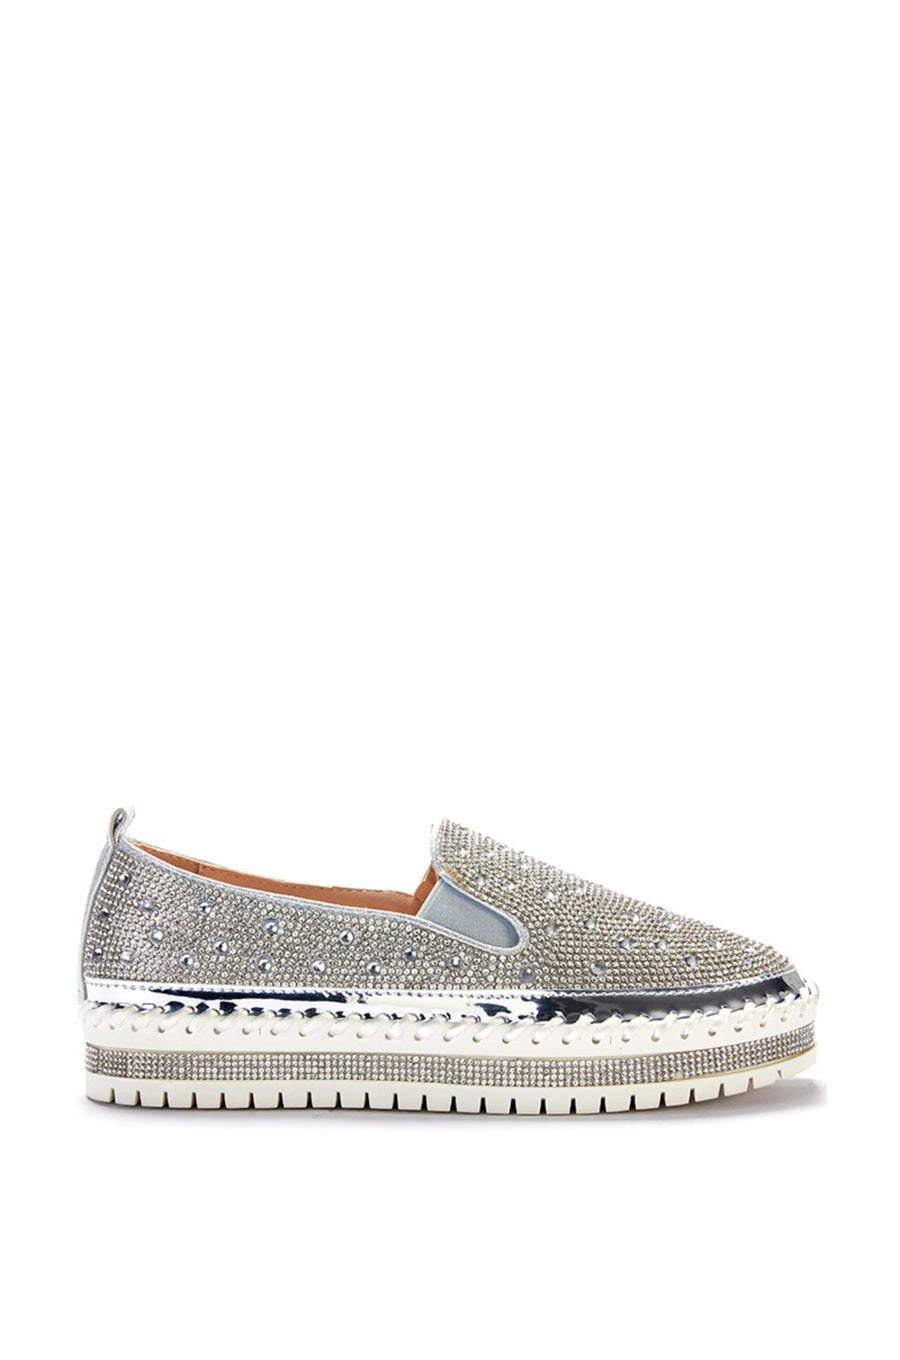 slip on metallic silver flat sneakers with crystal rhinestone embellishments and a white braided platform sole